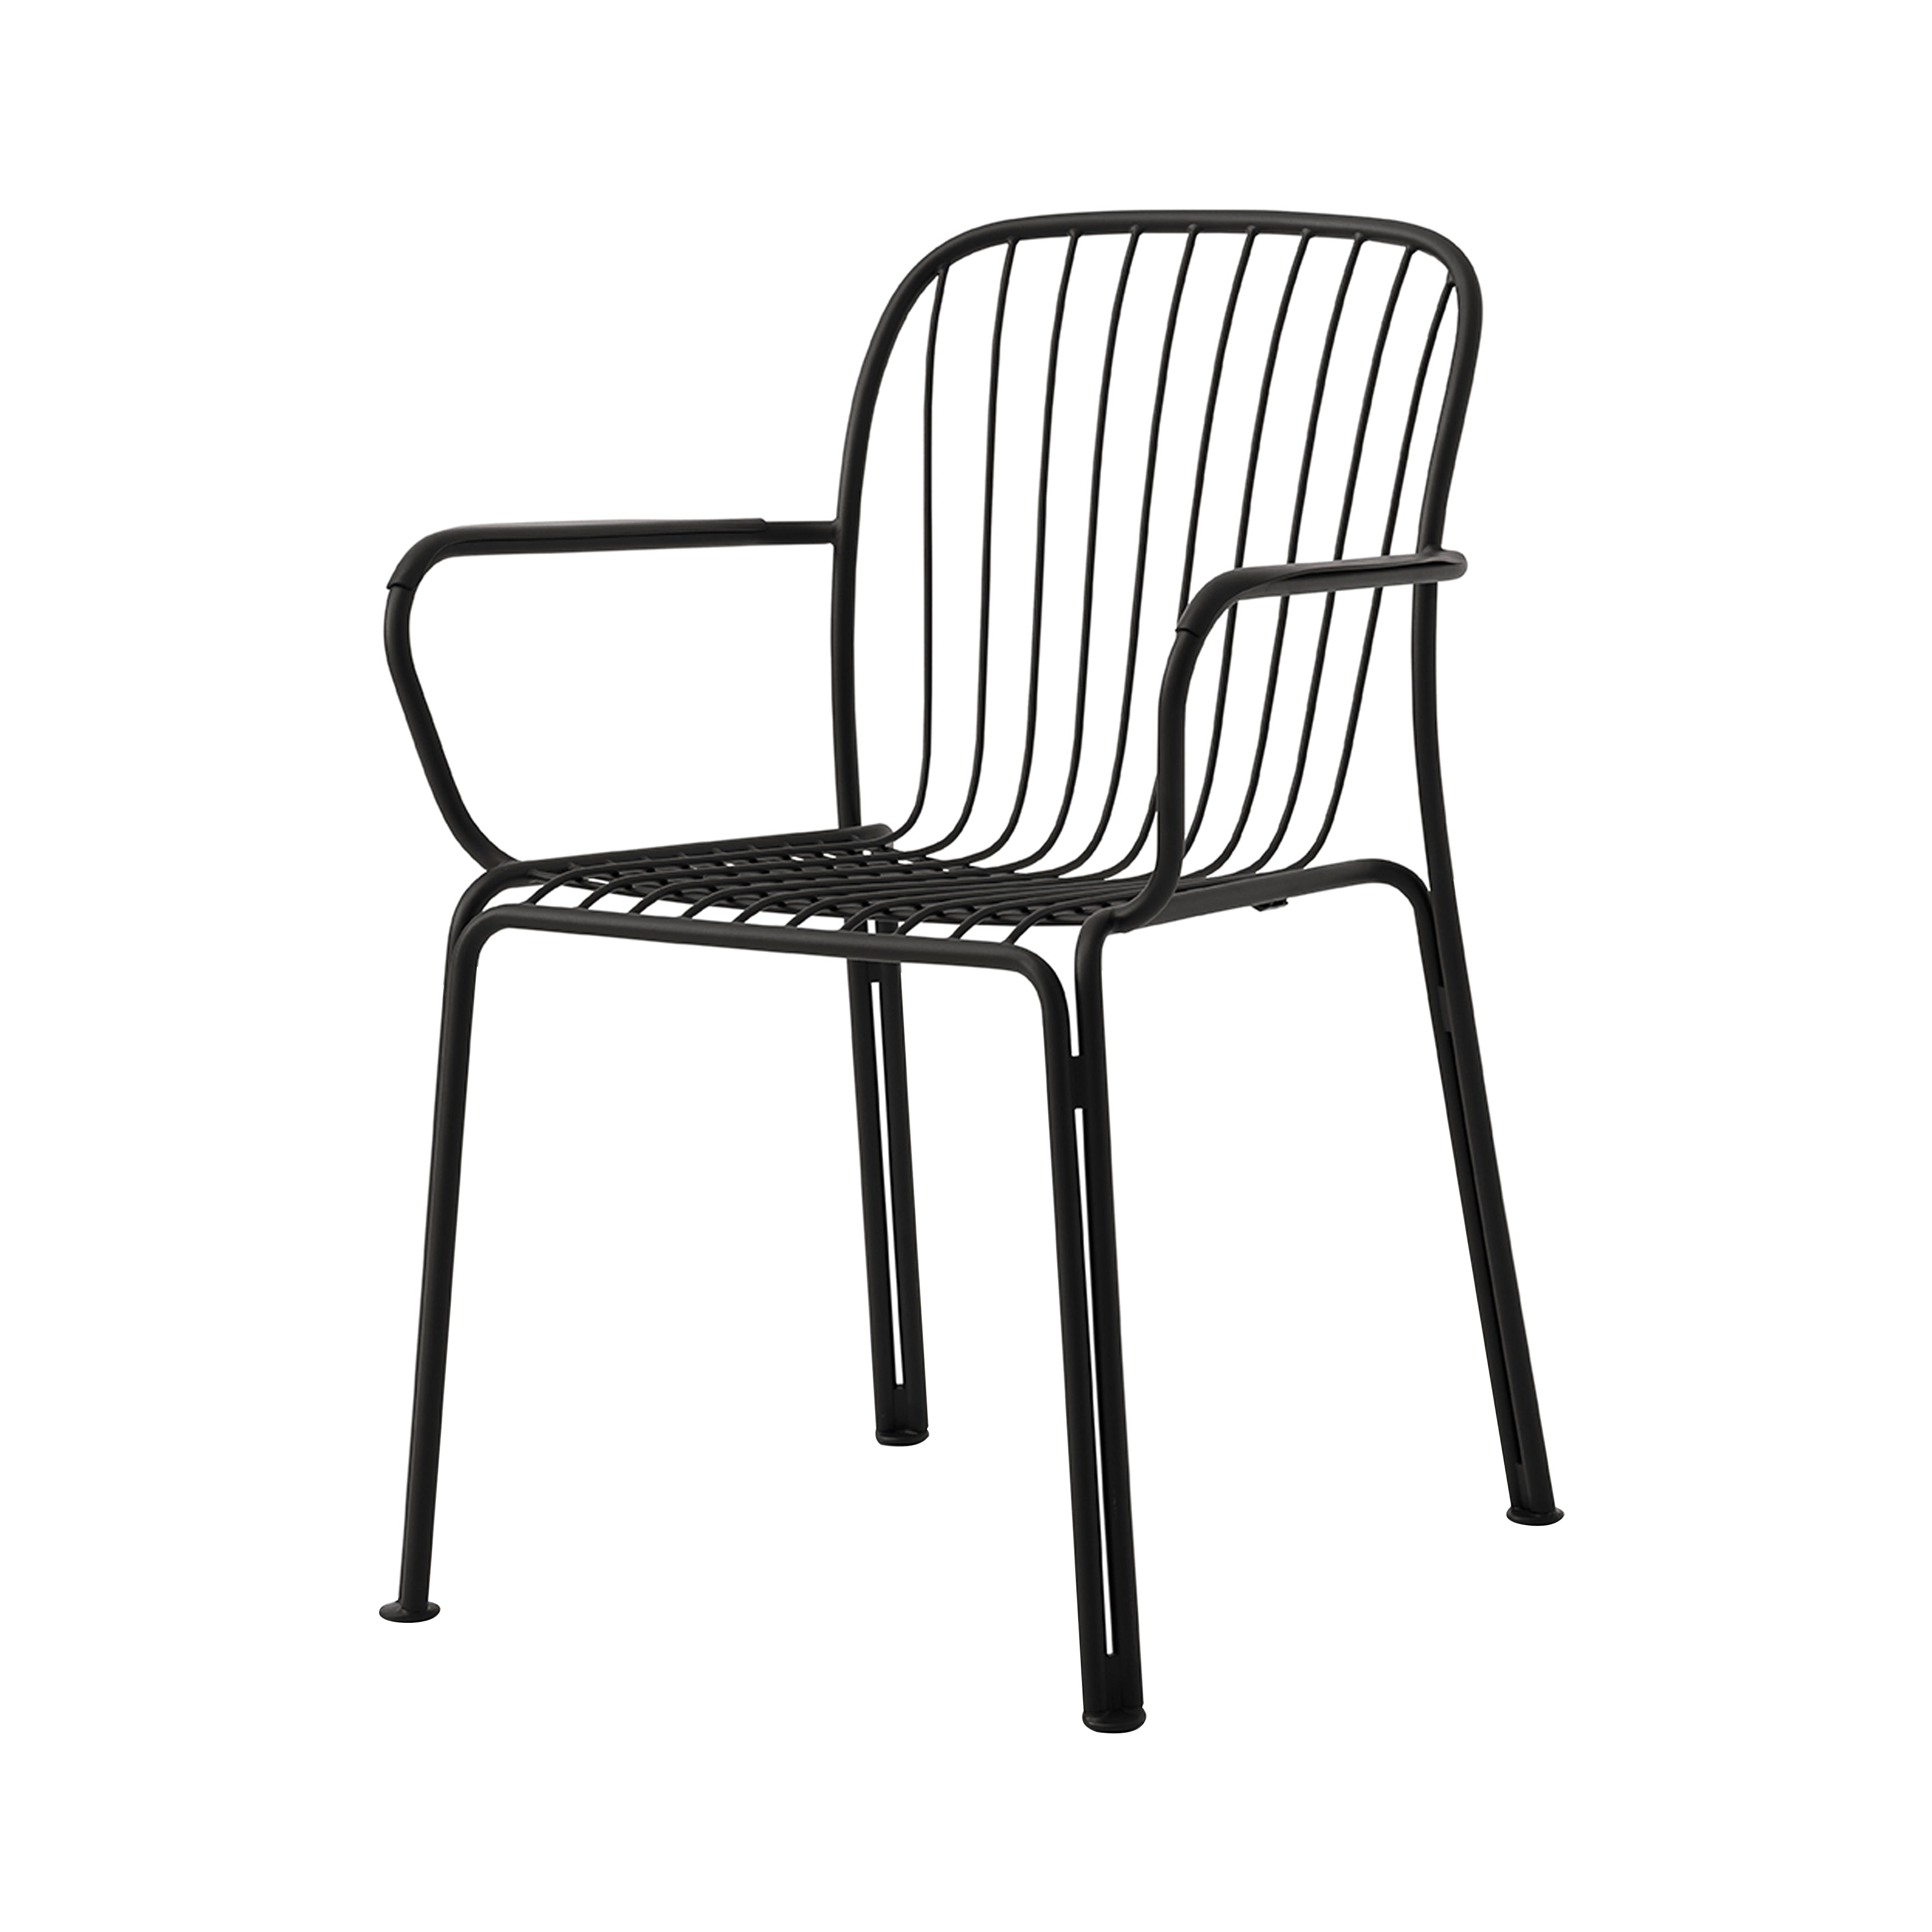 Thorvald SC95 Armchair: Outdoor + Warm Black + Without Cushion